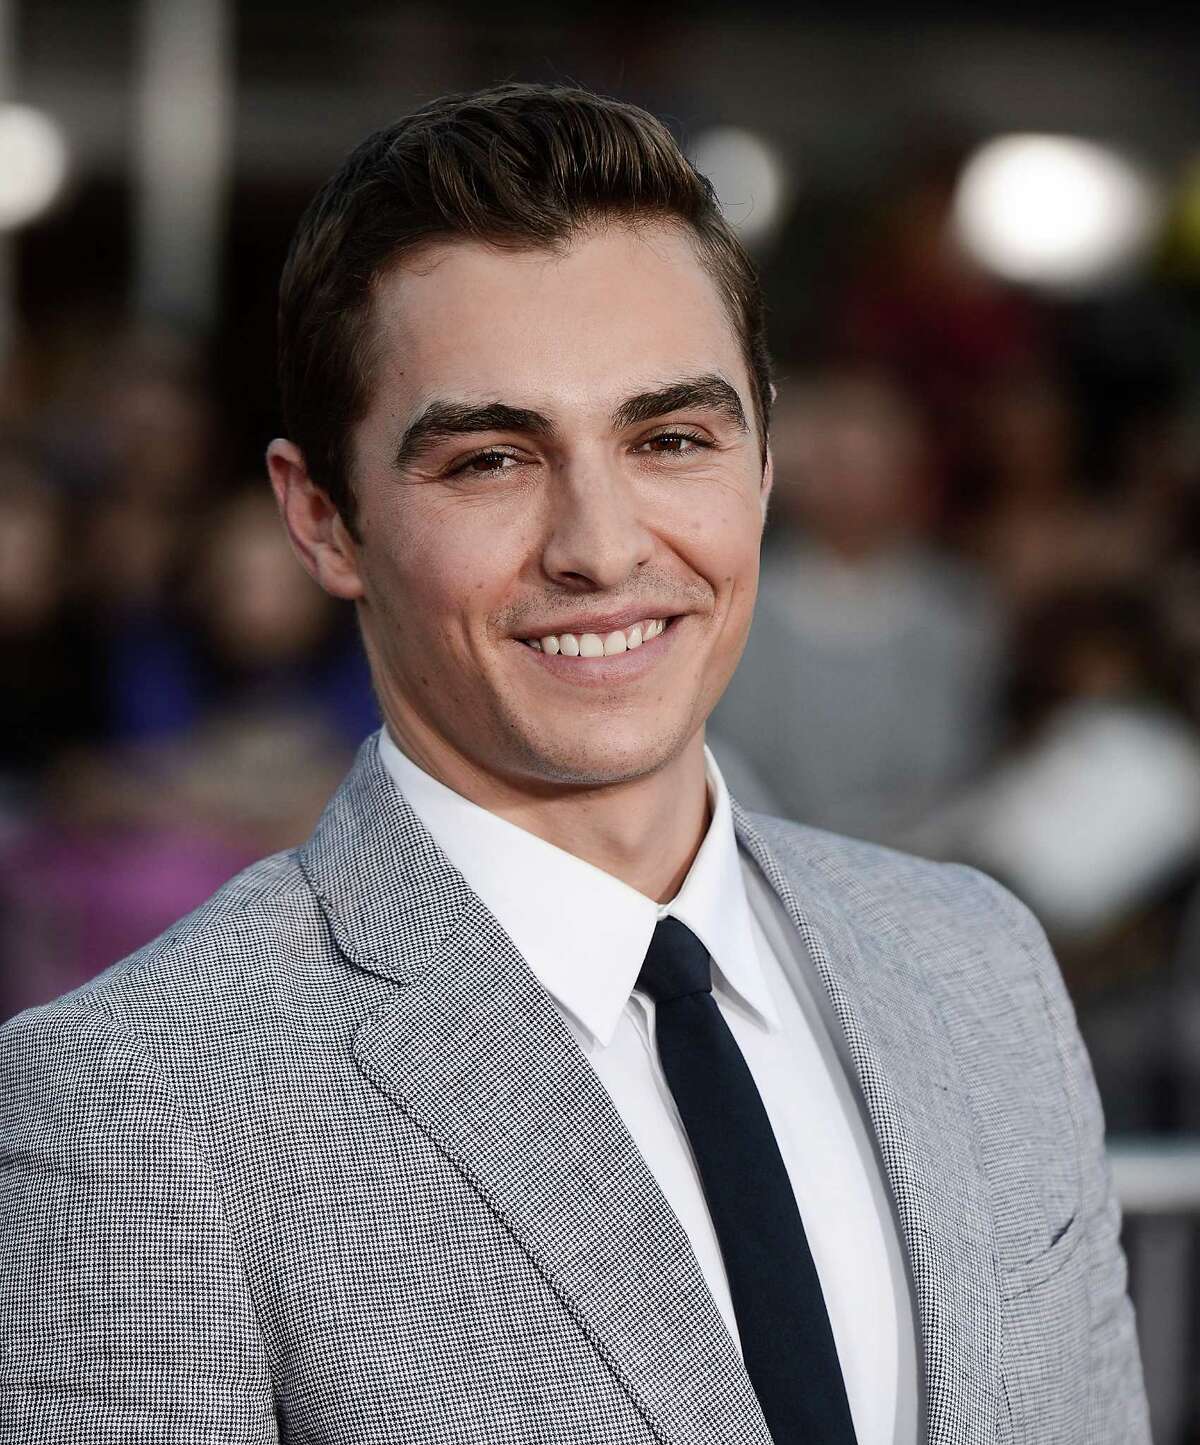 Actor Dave Franco attends the premiere of the feature film "Neighbors" on Monday, April 28, 2014 in Los Angeles. (Photo by Dan Steinberg/Invision/AP Images) ORG XMIT: CADS103